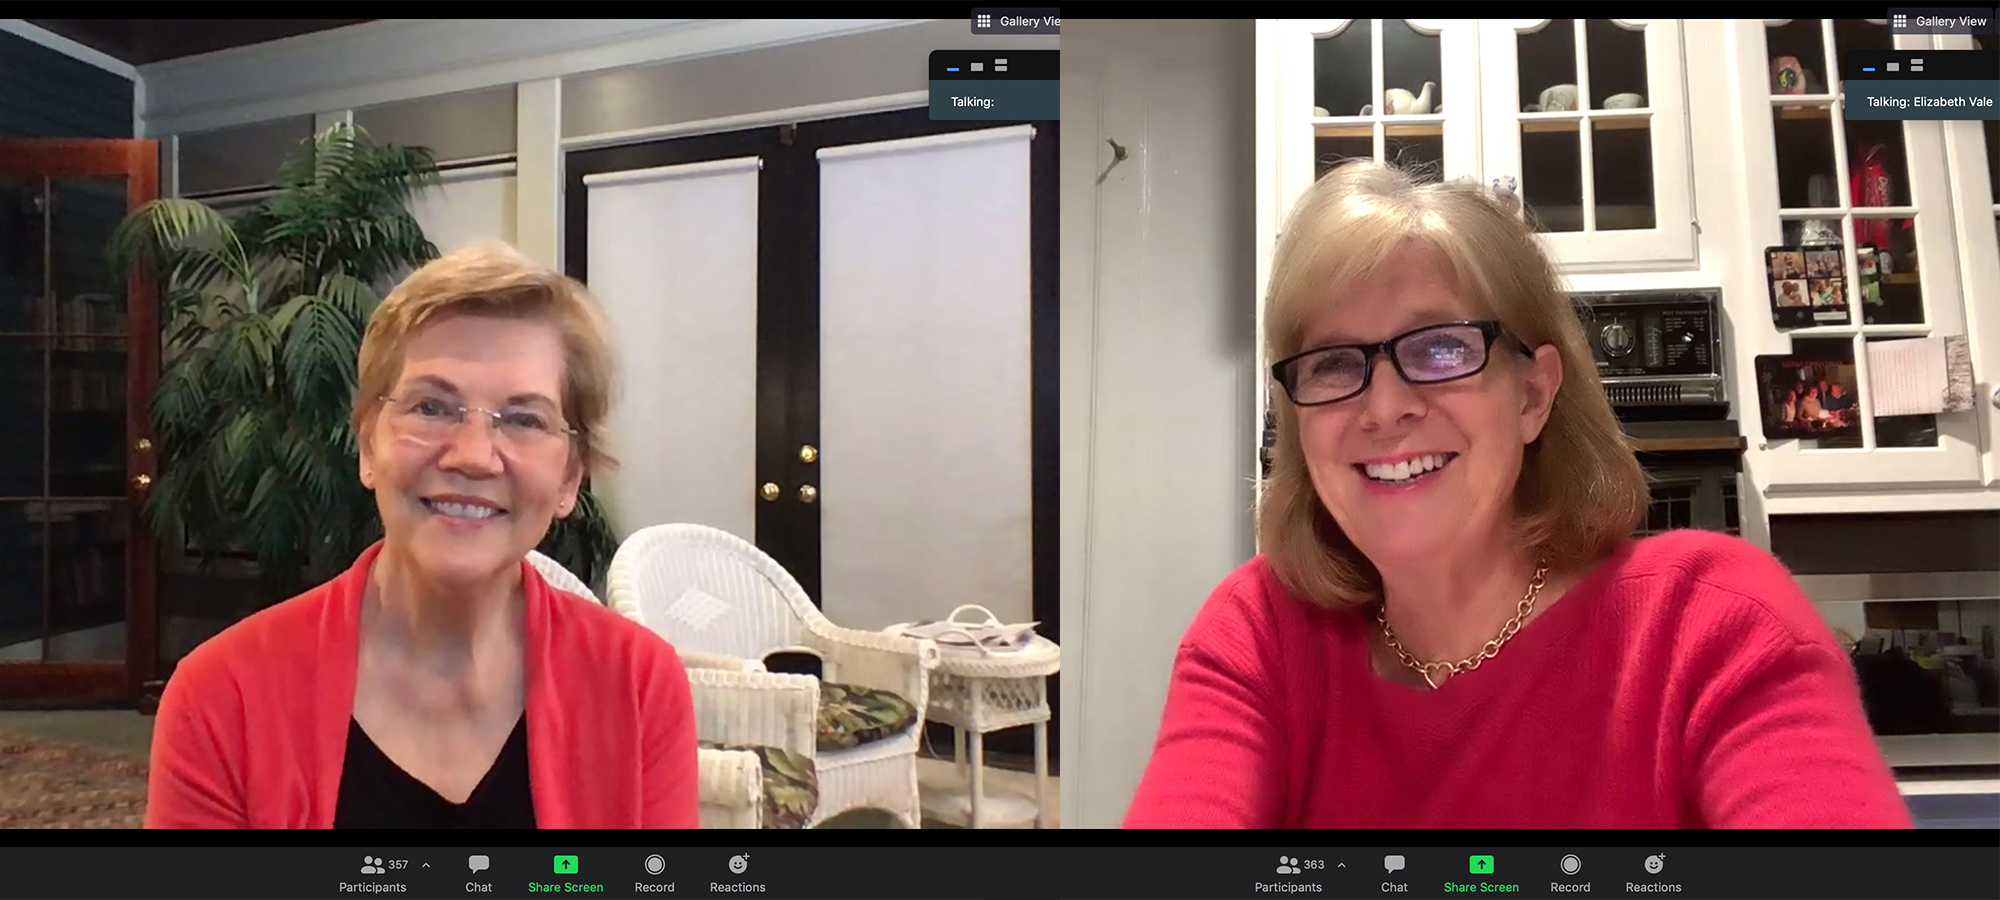 Woman with short blond hair, glasses, red cardigan and black t-shirt smiles on the left and a woman with a blond bob and pink shirt on the right smile during a Zoom call